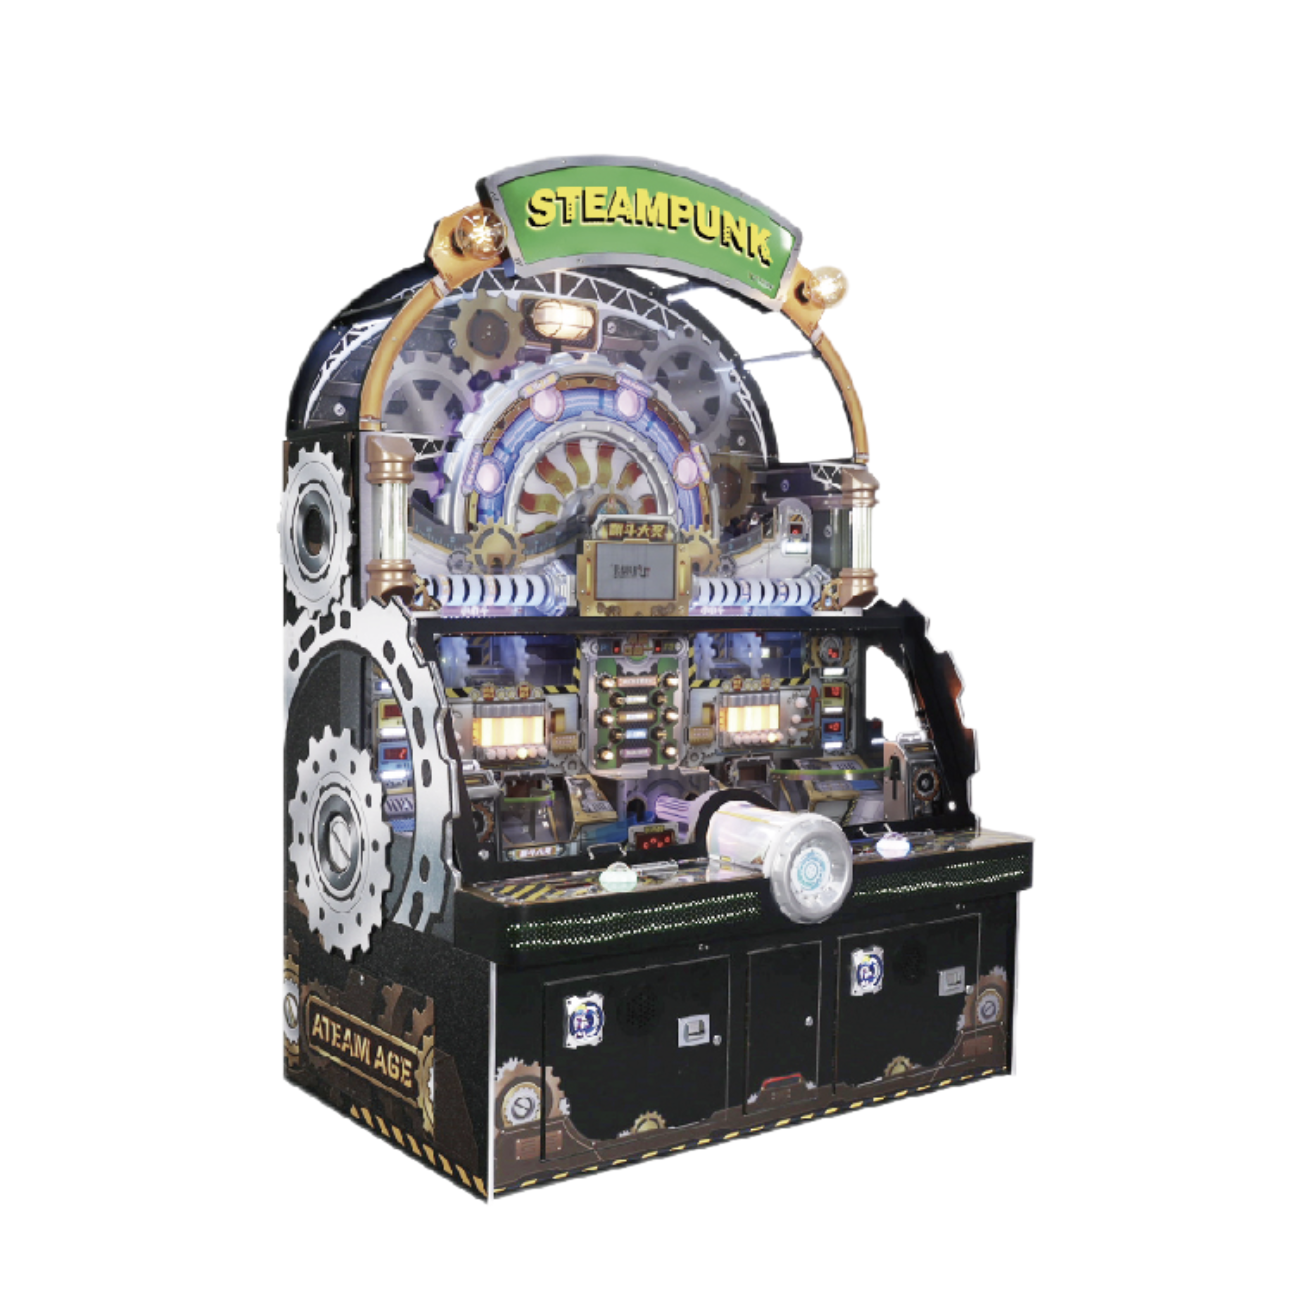 Most Popular Coin Dropper Arcade Machine For Sale Made In China